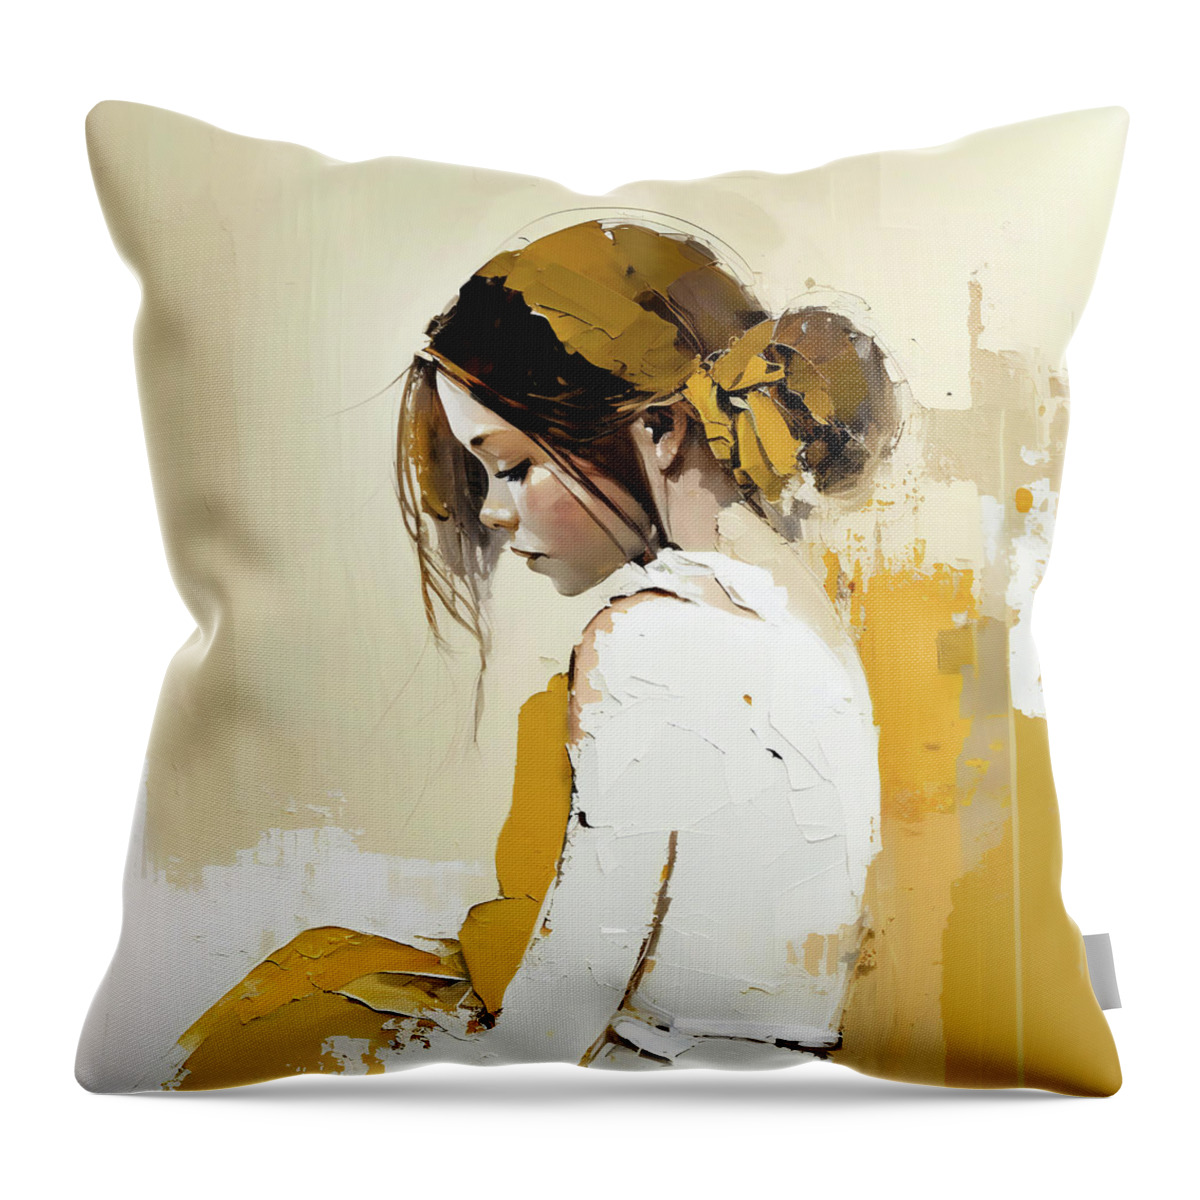 Portrait Throw Pillow featuring the painting Lonely Girl by Jacky Gerritsen